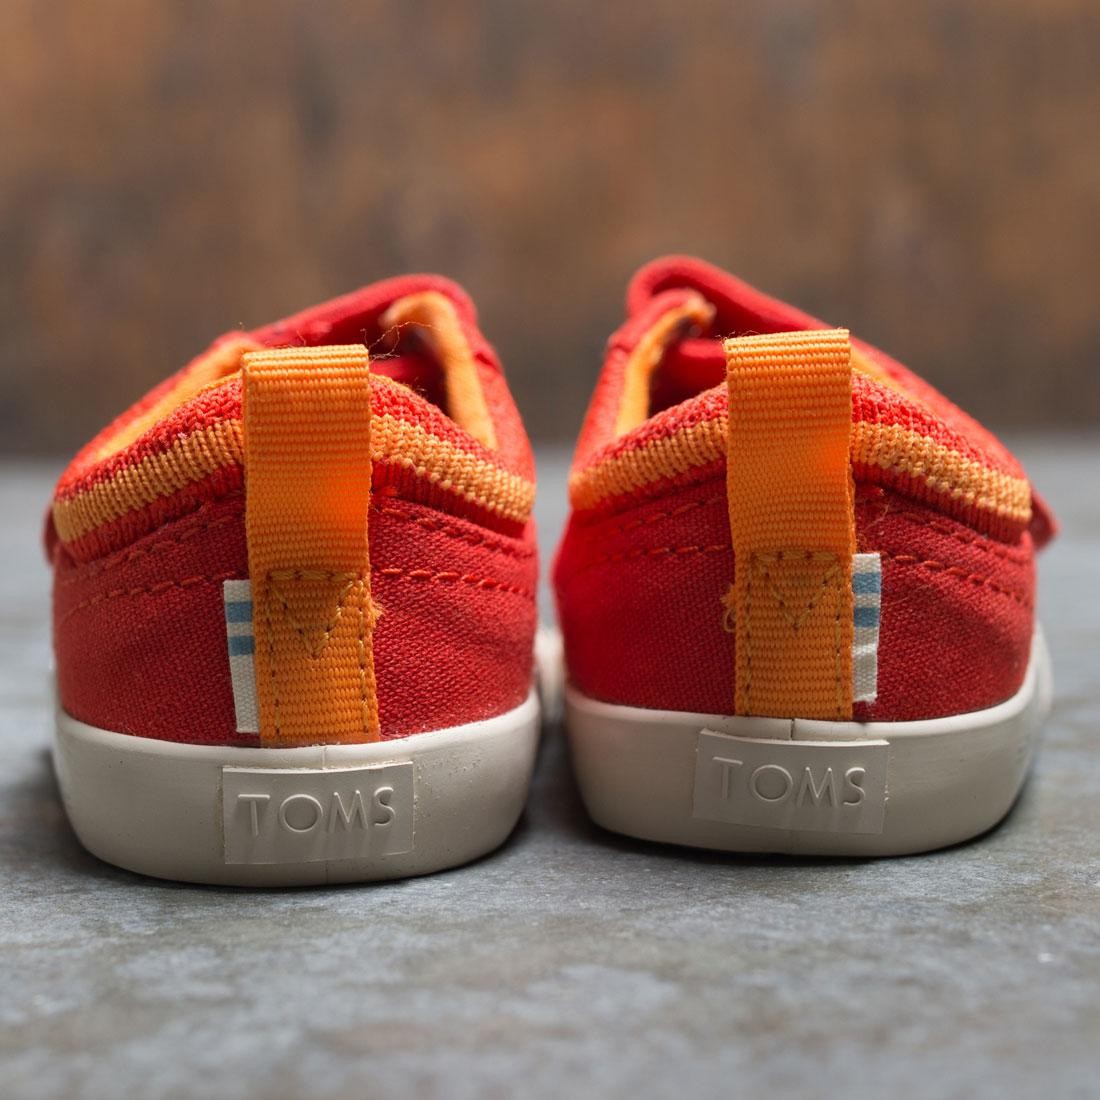 TOMS x Sesame Street Toddlers Doheny - Elmo red